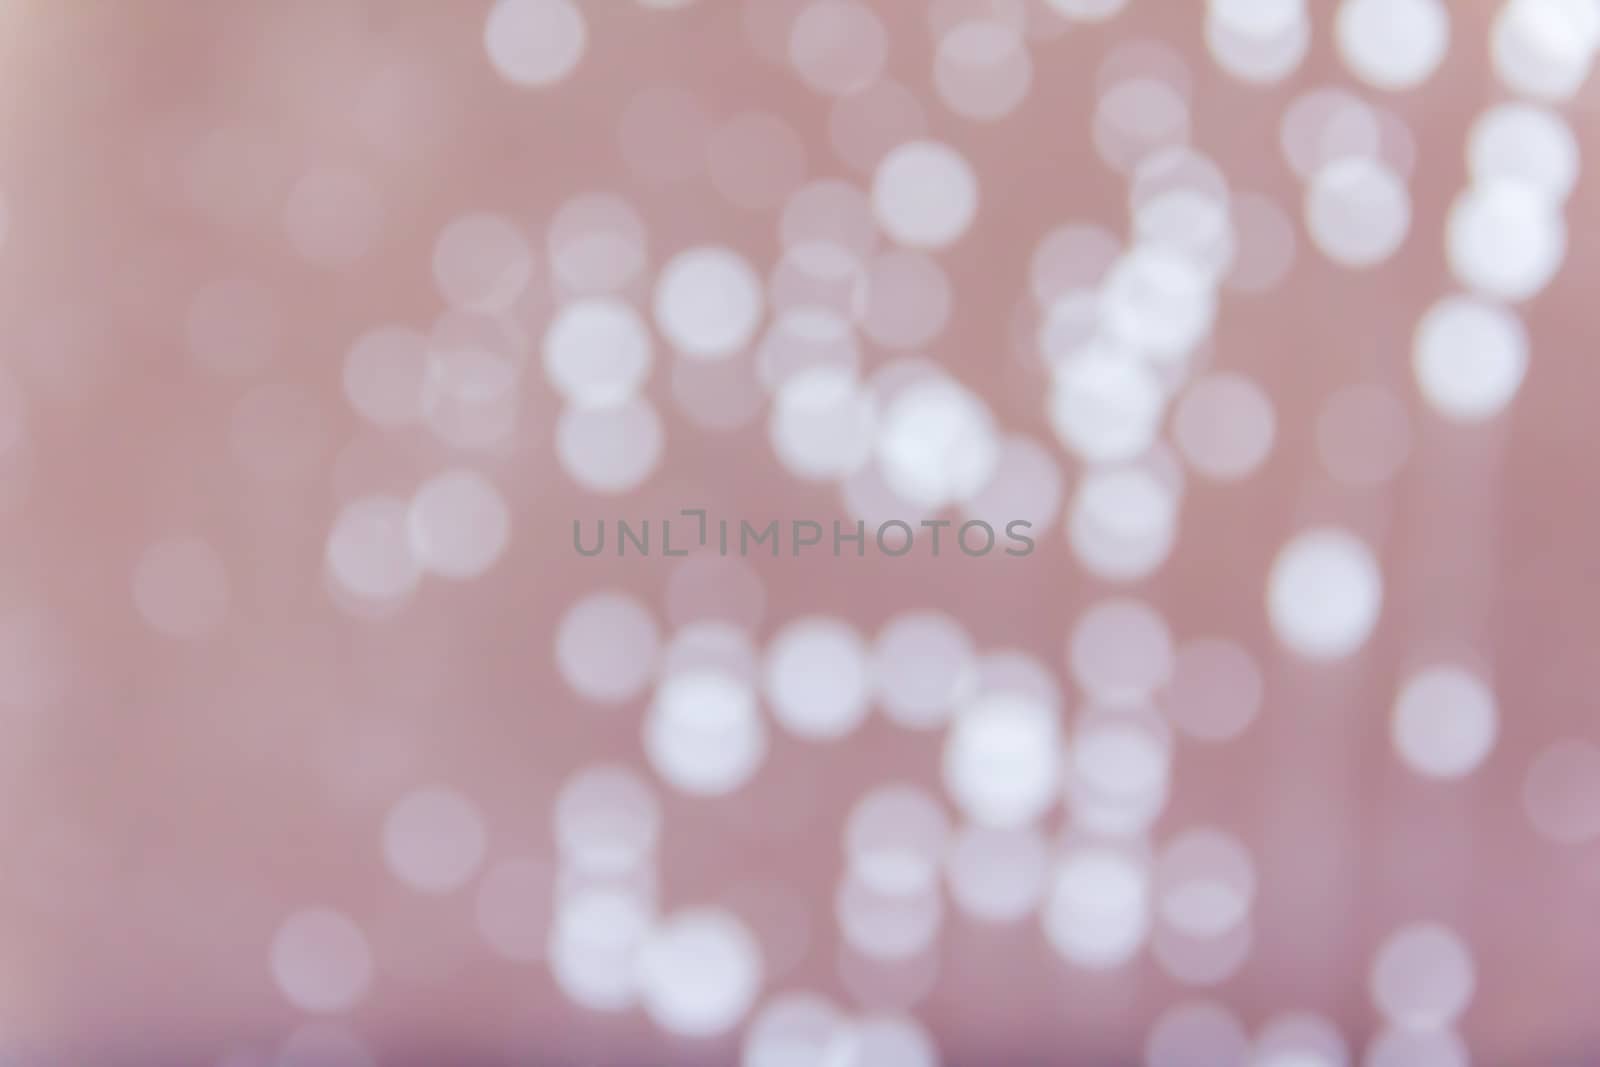 Abstract blurred background with rain or water drop bokeh on glass mirror in sweet pastel pink colour 